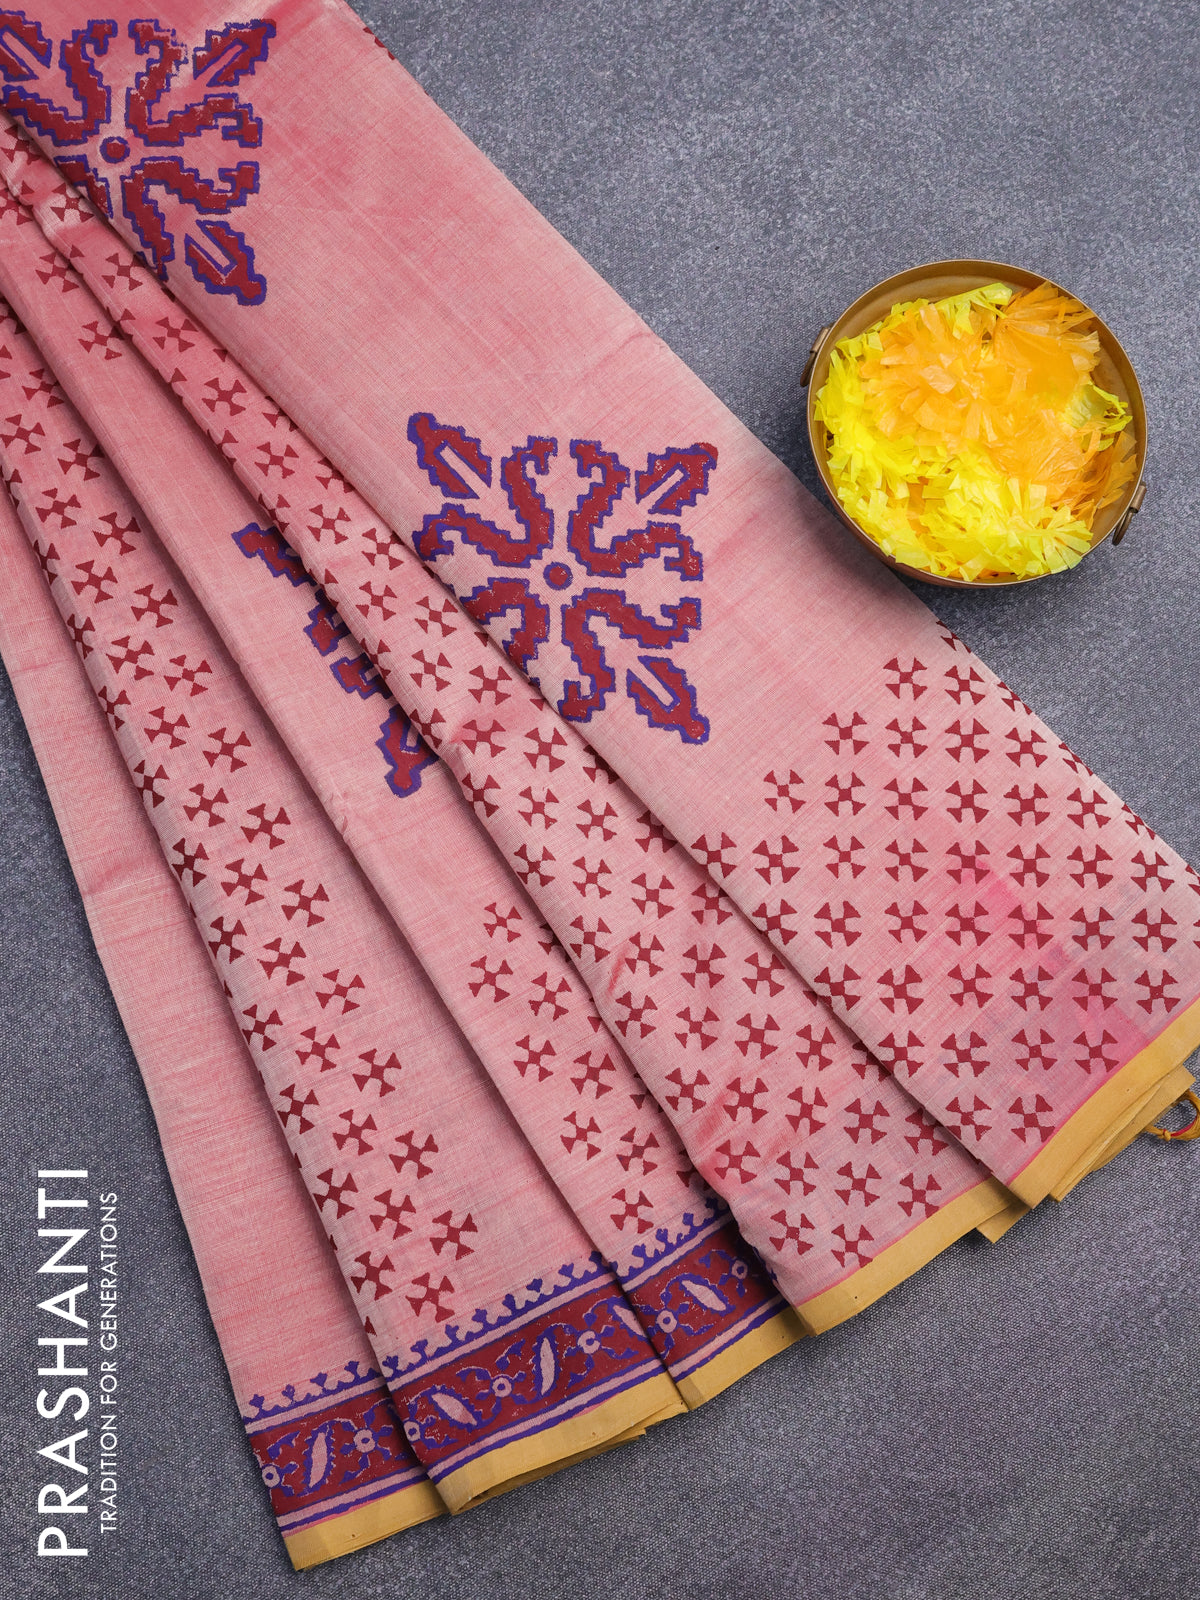 Silk cotton block printed saree dual shade of pink and mustard yellow with allover butta prints and printed border